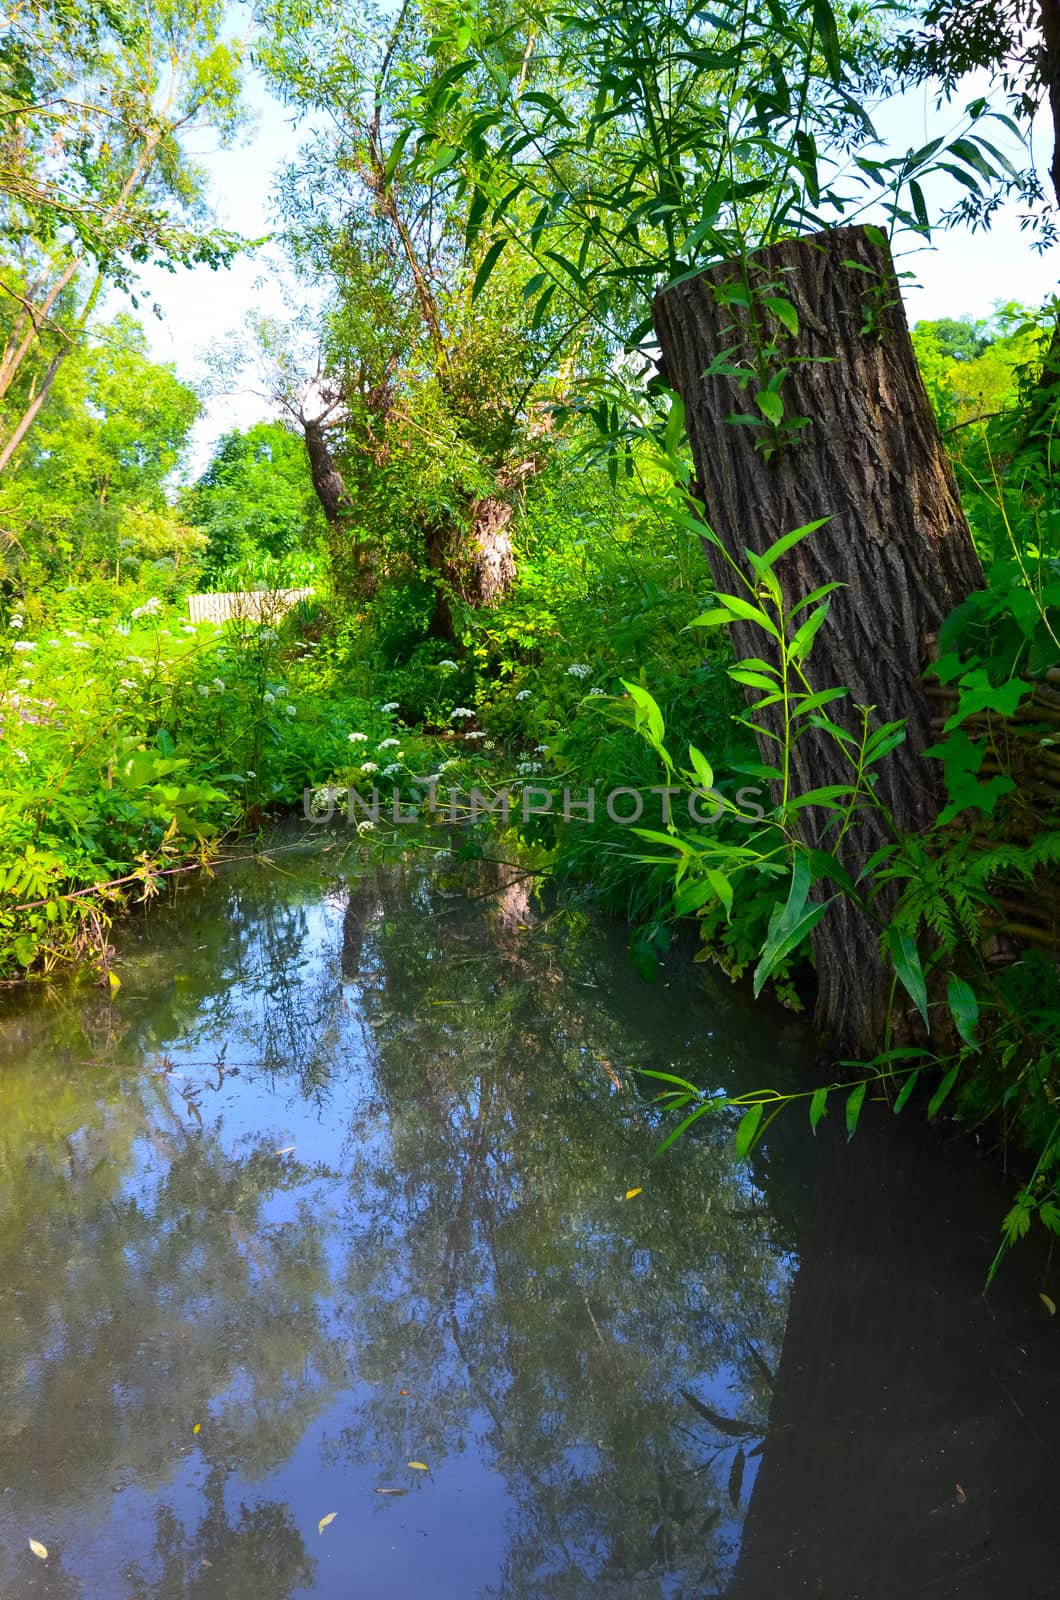 Small Clean River and Green Overgrown River Banks